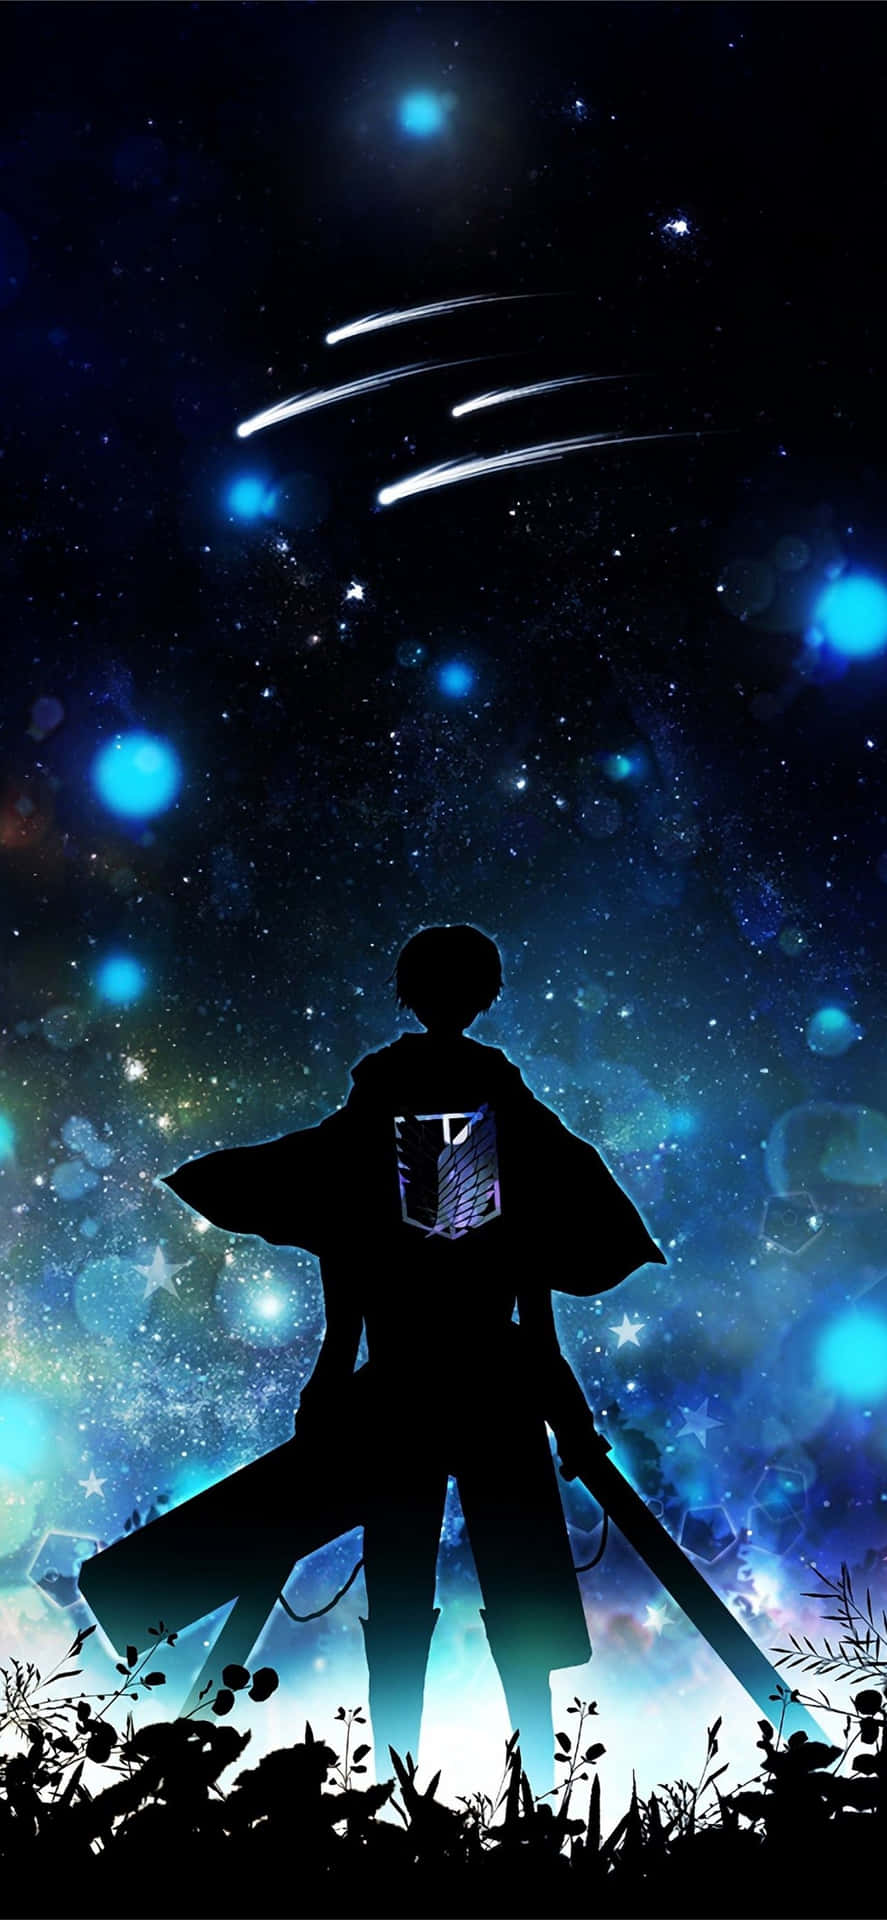 Make A Bold Statement With This Cool Anime Iphone Wallpaper! Background